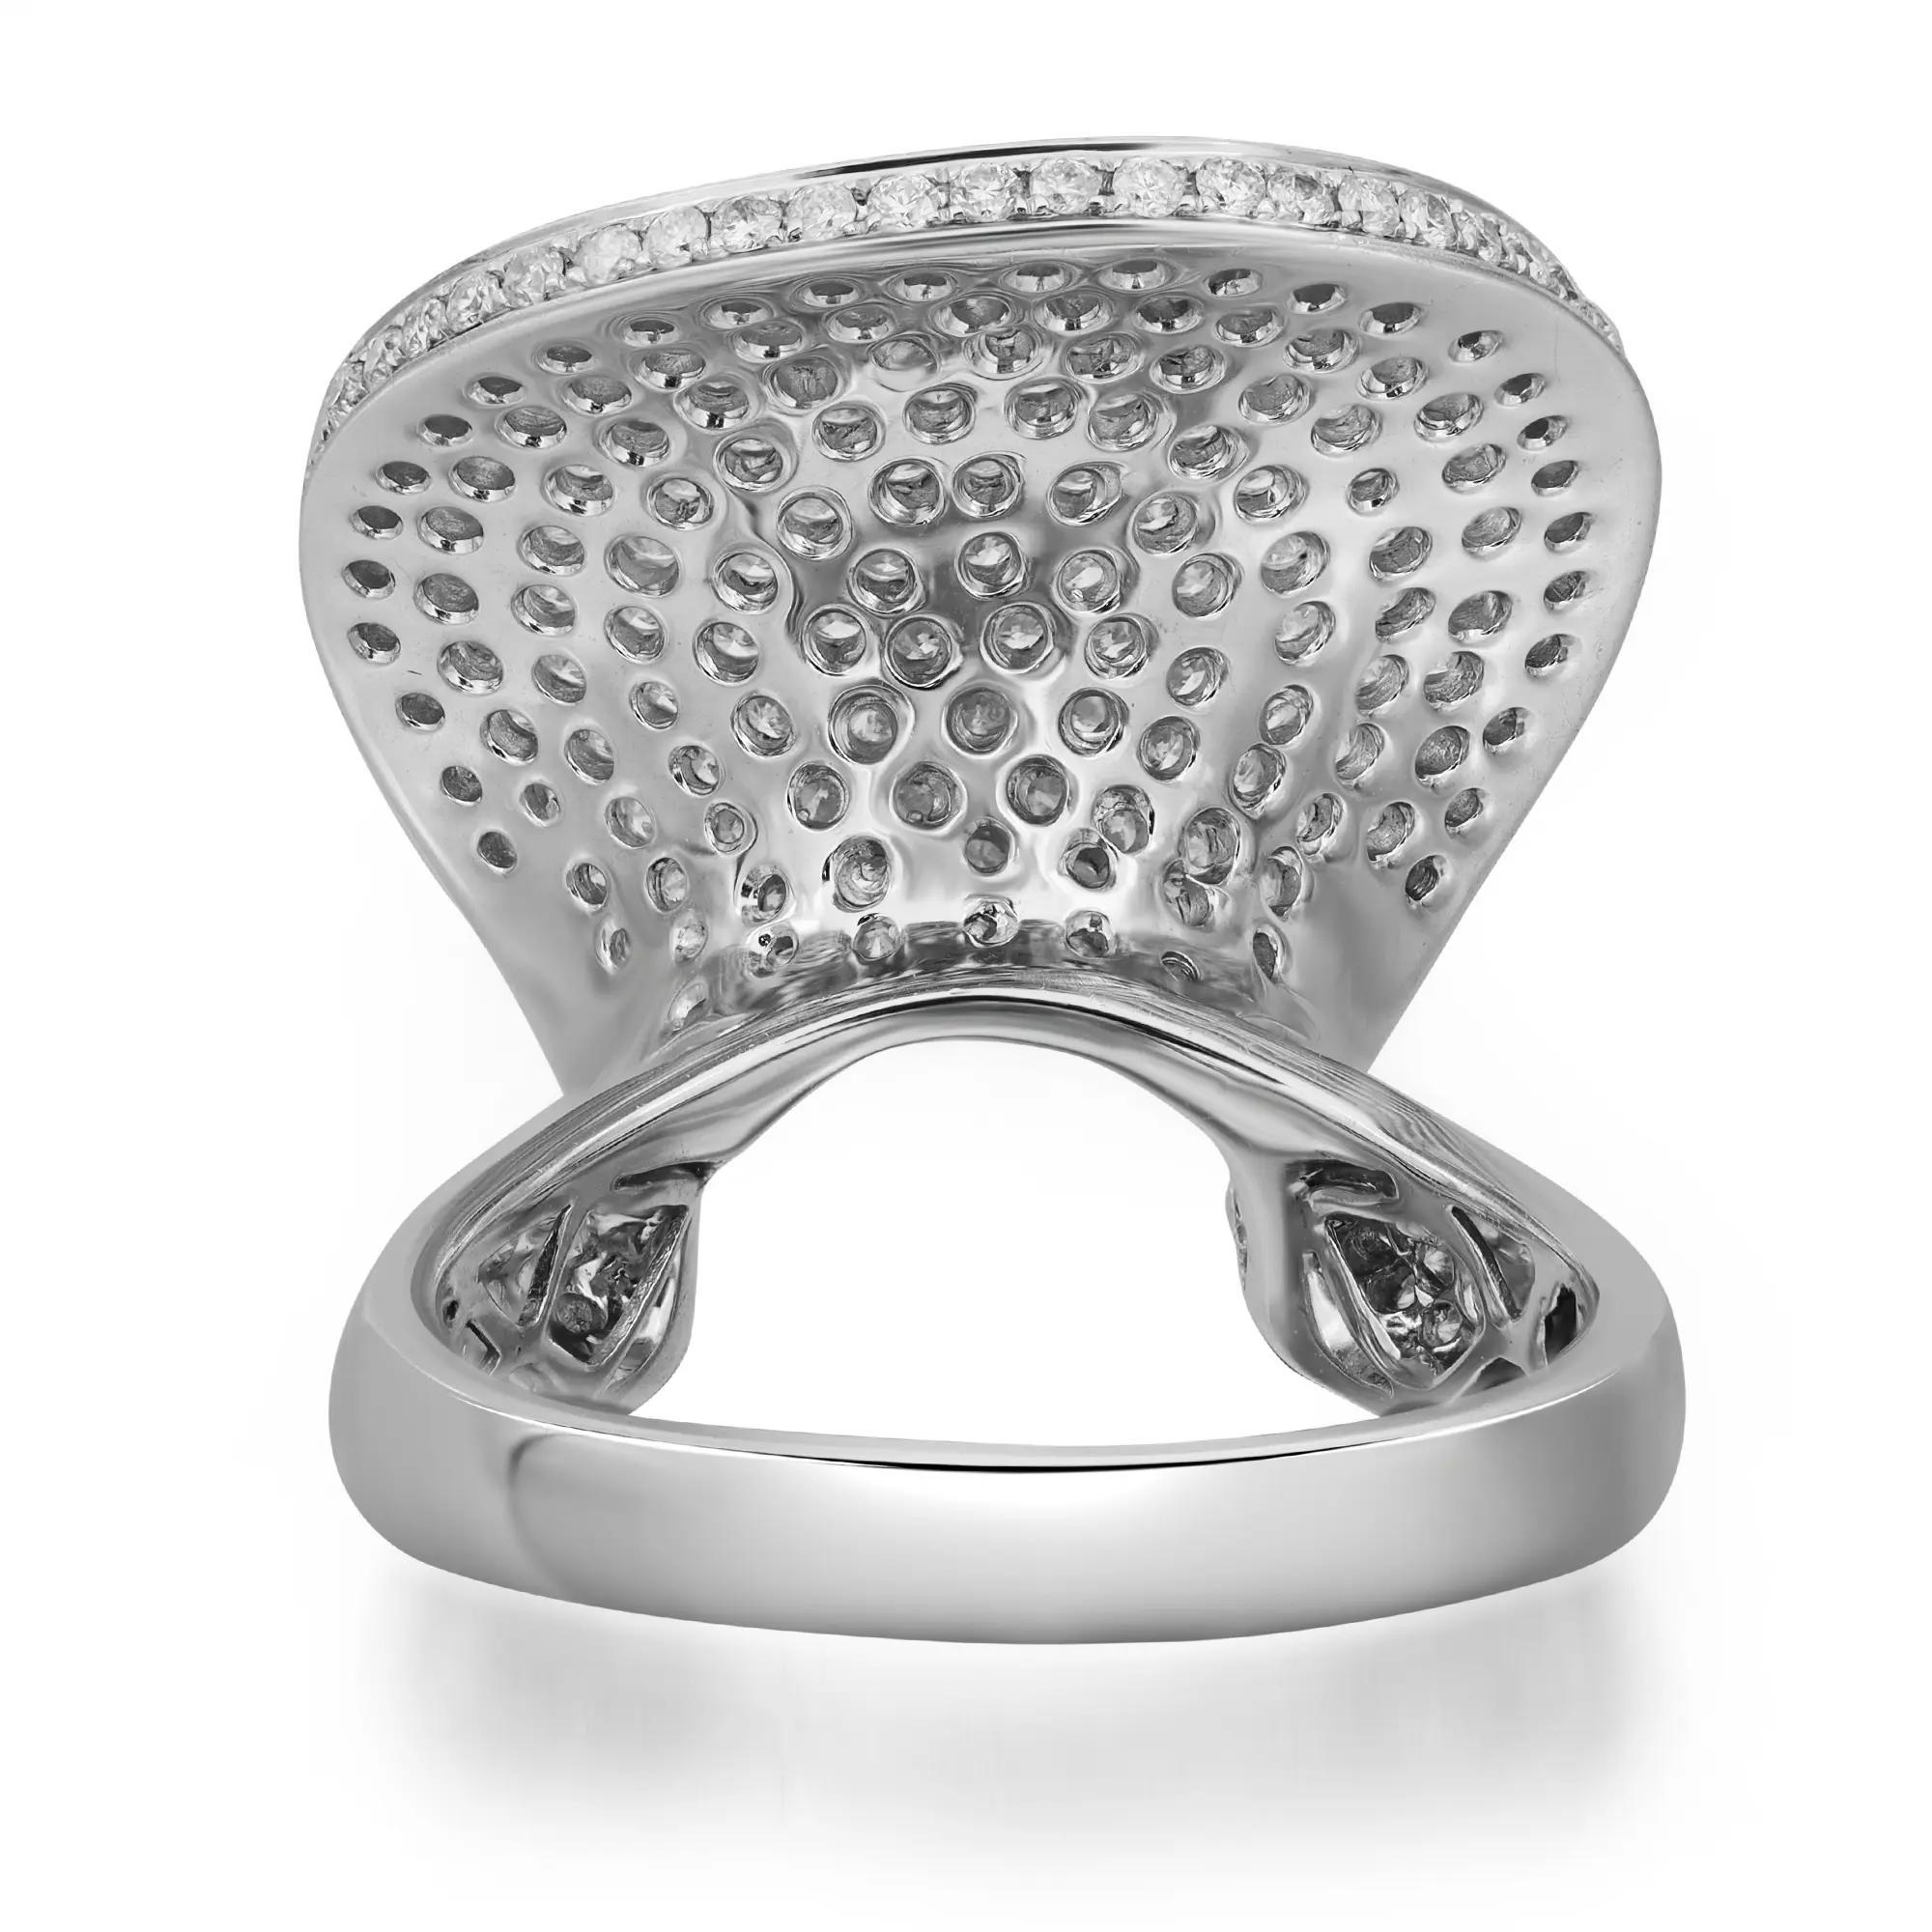 Modern 2.32Cttw Pave Set Round Cut Diamond Ladies Cocktail Ring 14K White Gold Size 7.5 For Sale